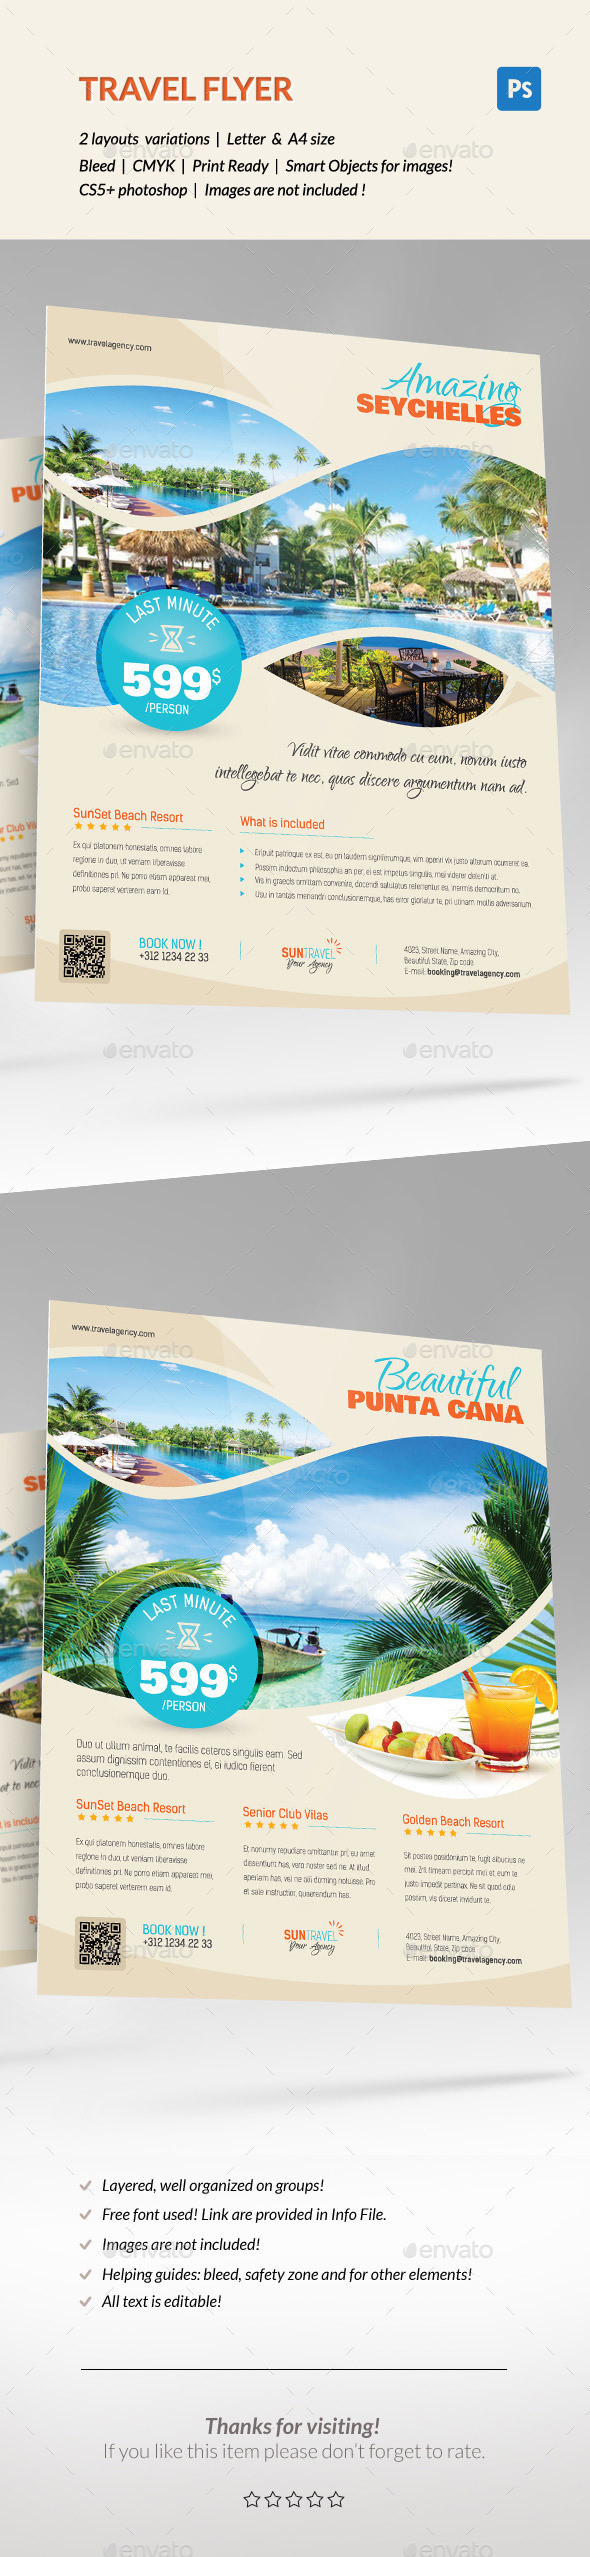 Travel flyer template 04 preview